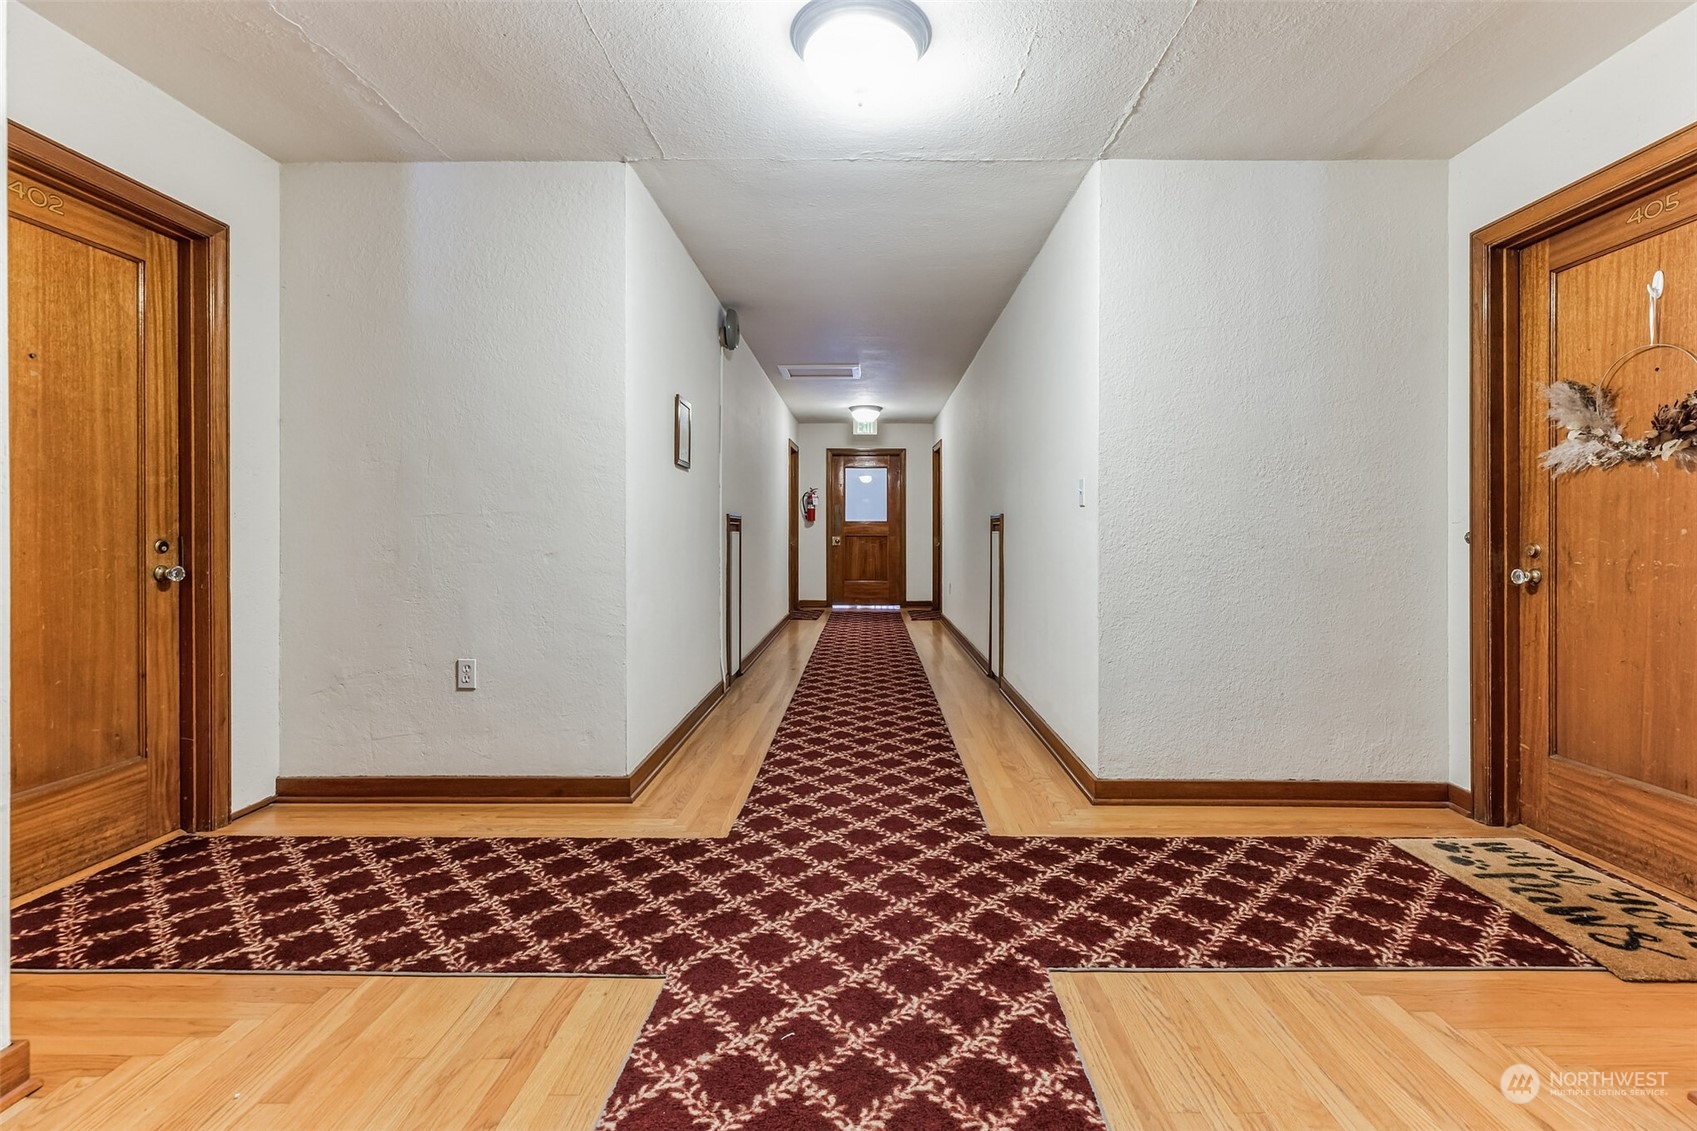 a view of a room with wooden floor and a carpet